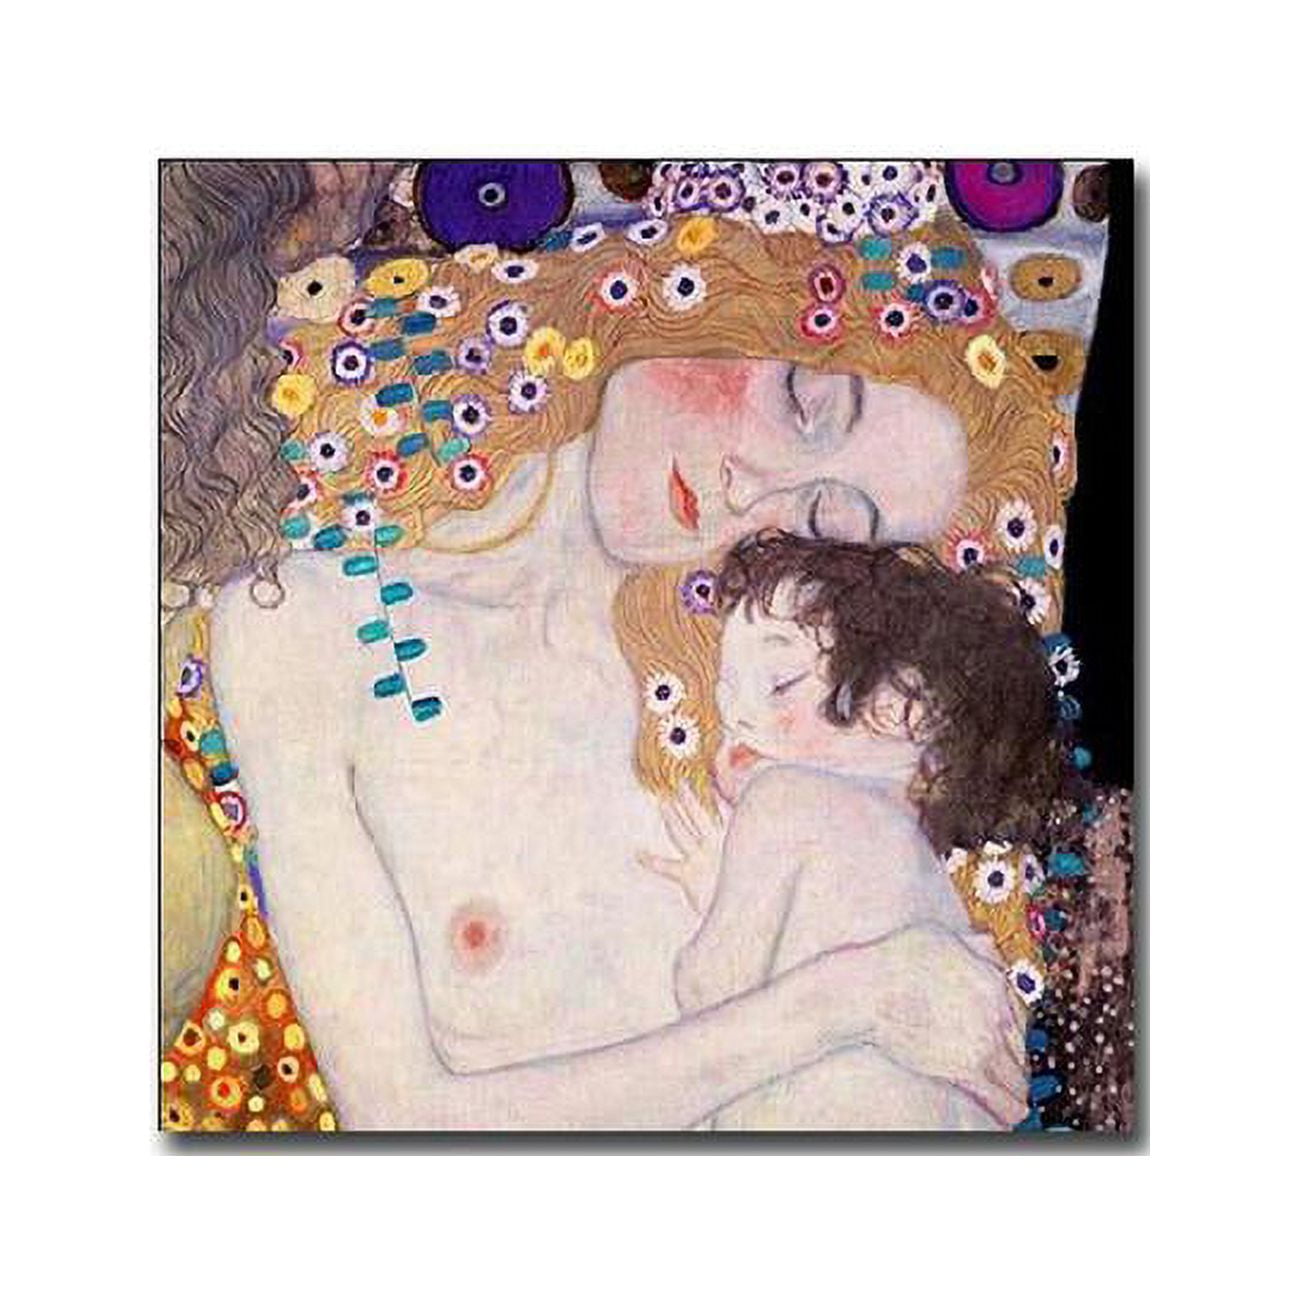 1212h209sag The Three Ages Of Woman By Gustav Klimt Premium Gallery-wrapped Canvas Giclee Art - 12 X 12 X 1.5 In.